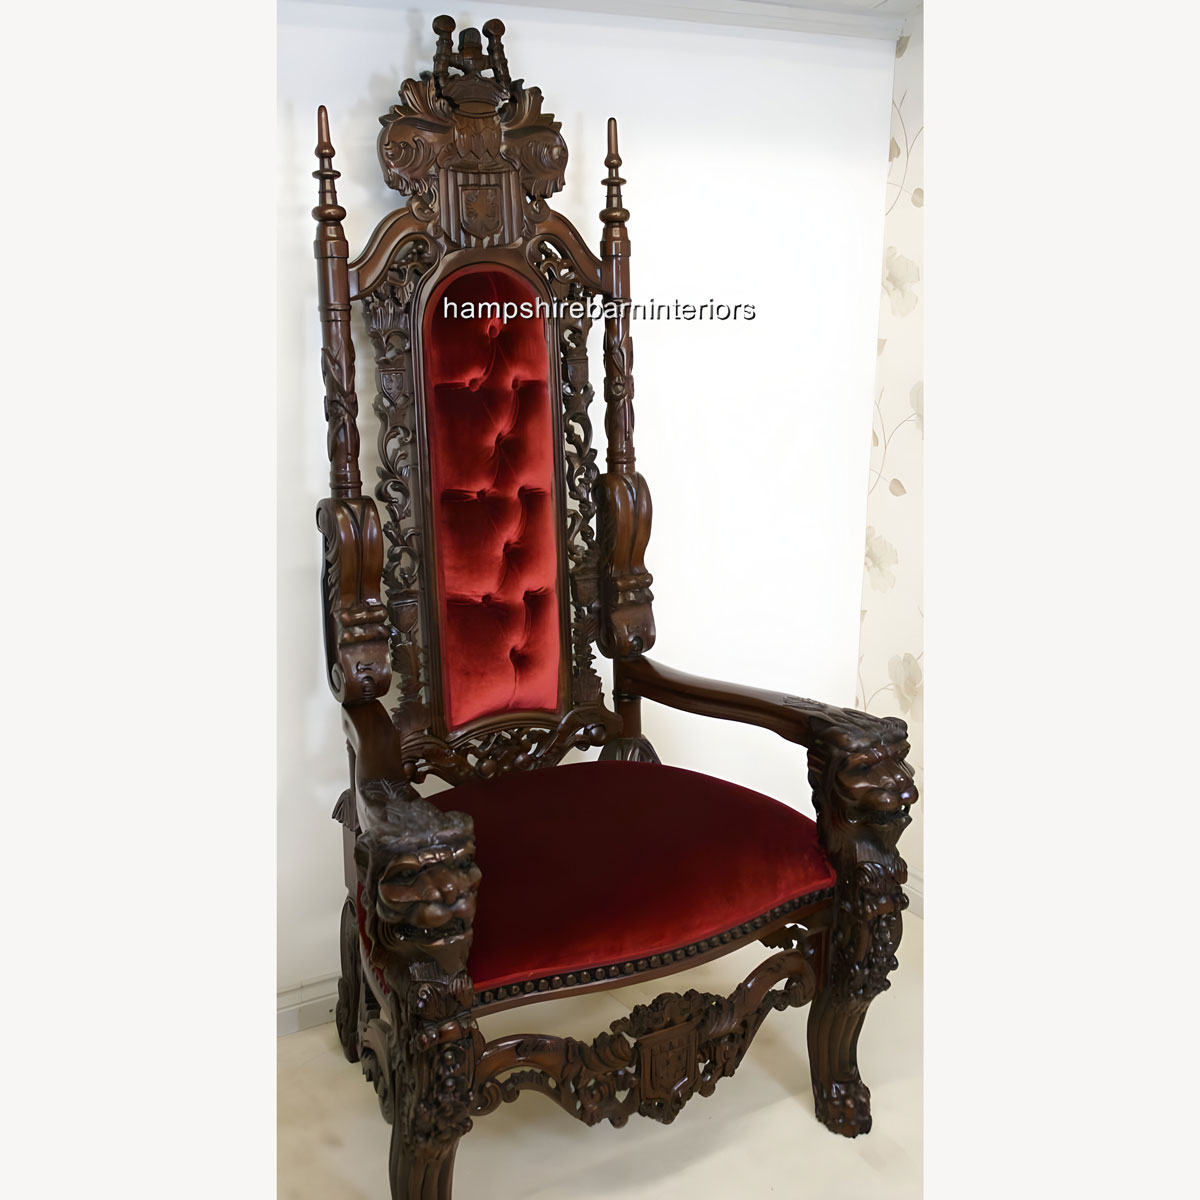 A Gothic Lion King Throne Chair In Mahogany And Red Velvet 2 - Hampshire Barn Interiors - A Gothic Lion King Throne Chair In Mahogany And Red Velvet -